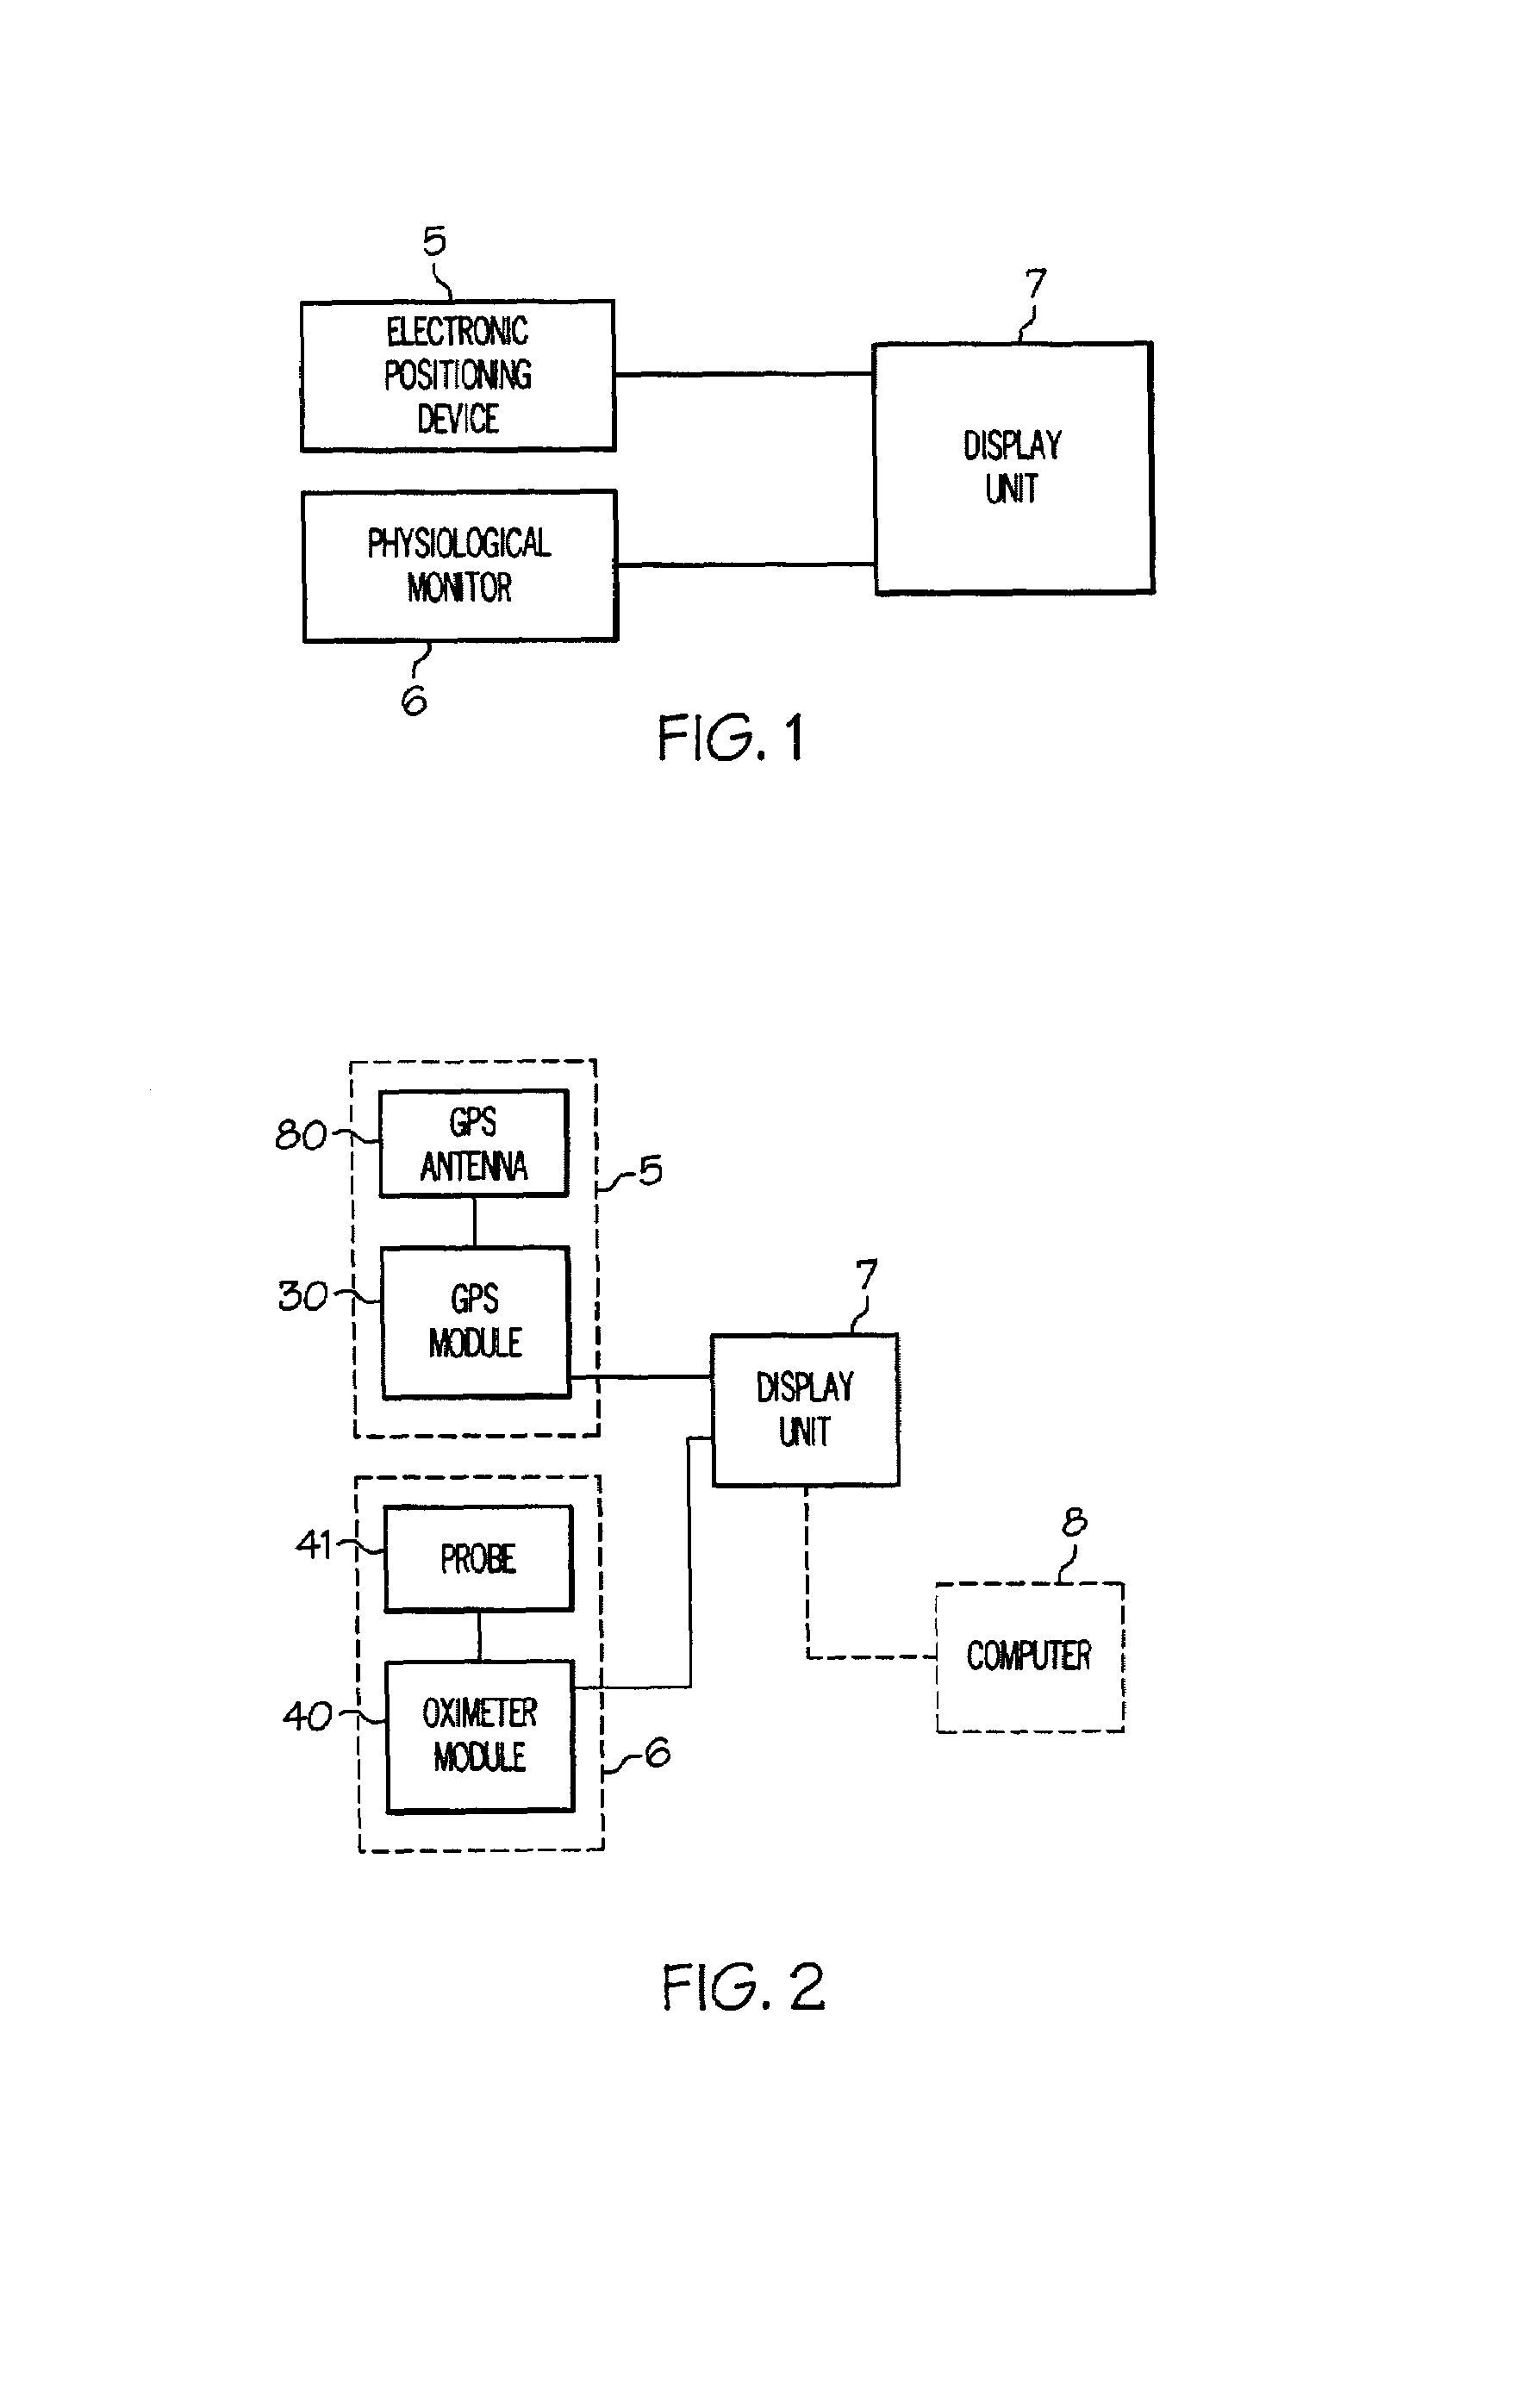 Exercise monitoring system and methods